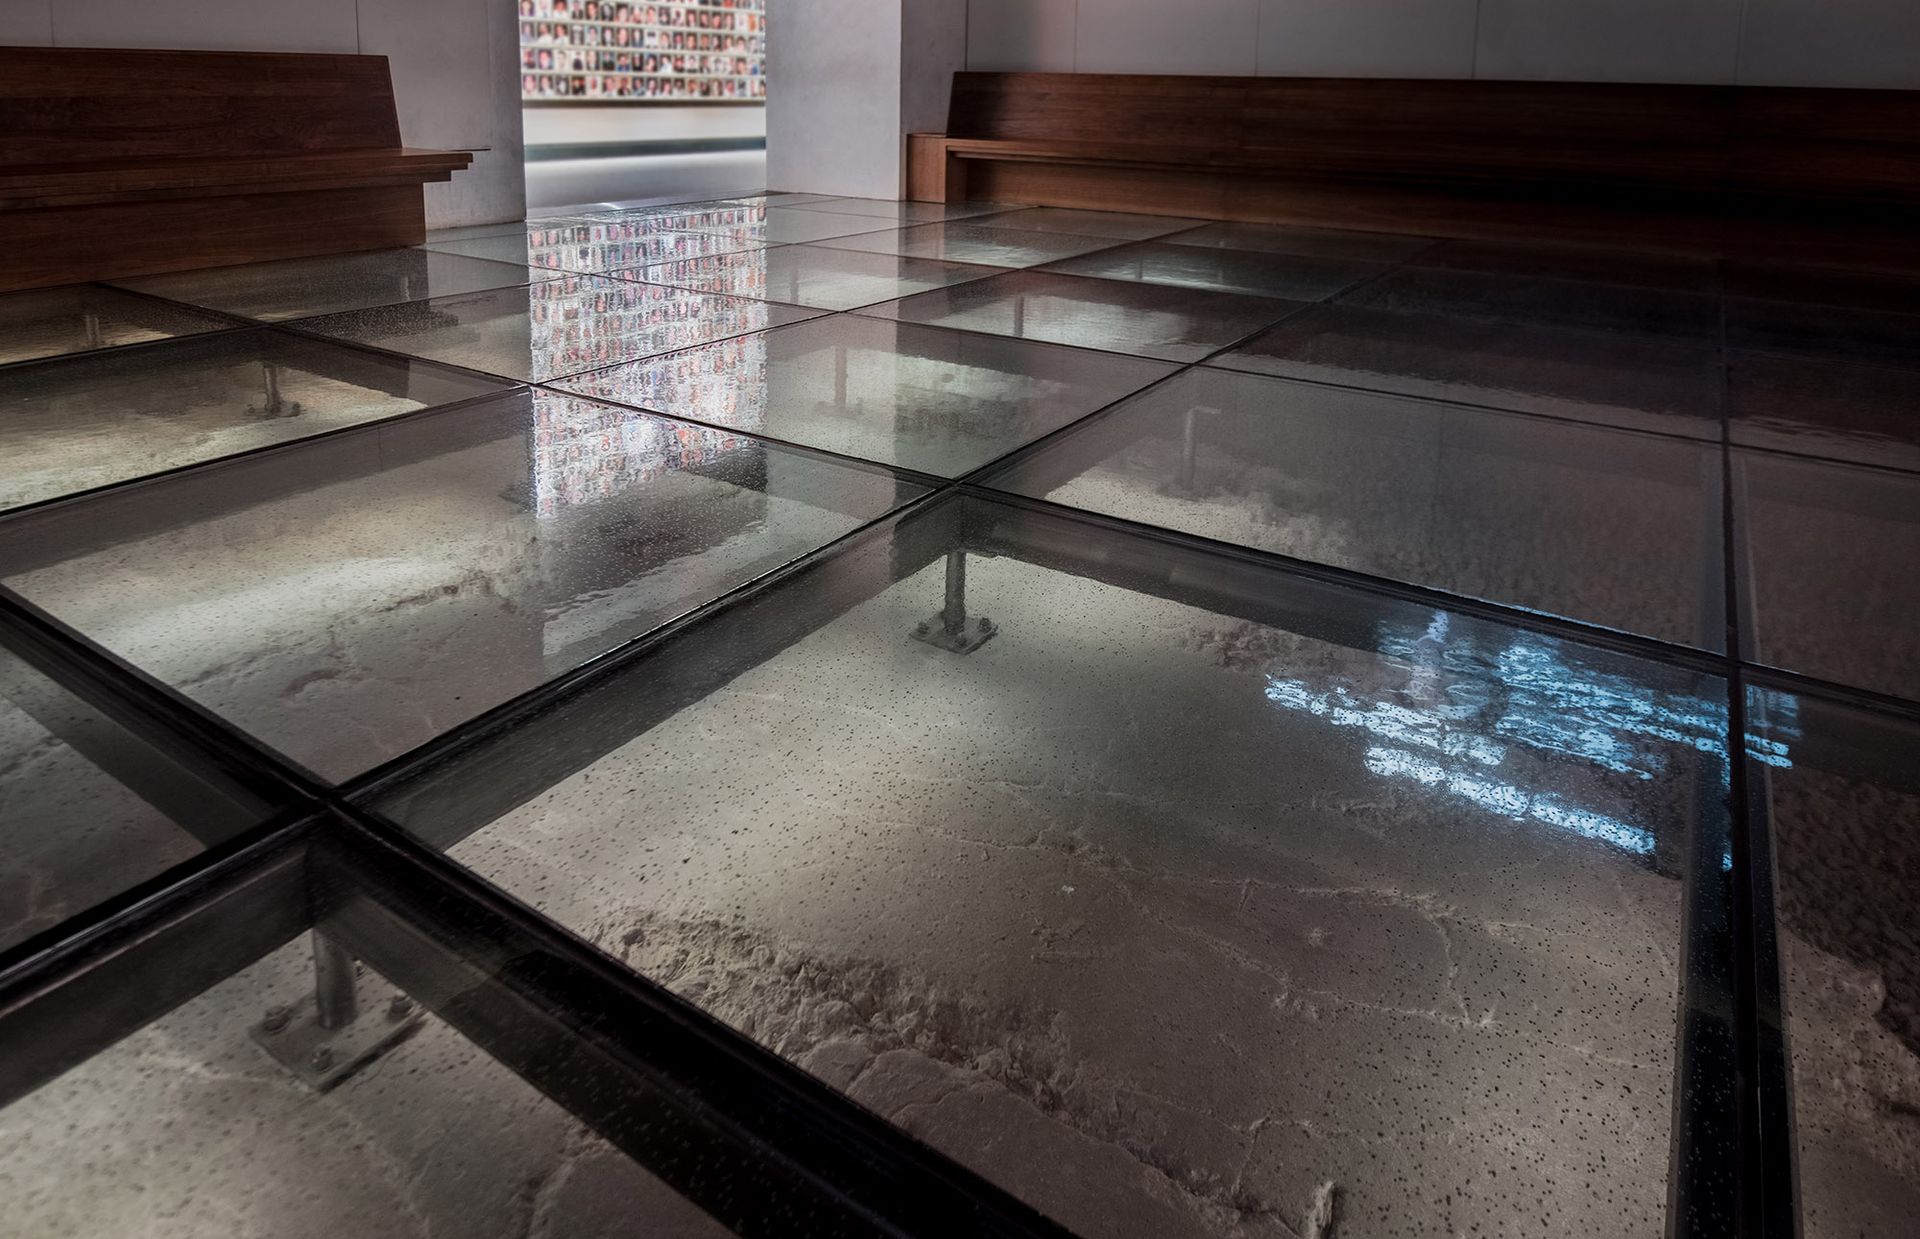 Glass flooring at the 9/11 museum. 